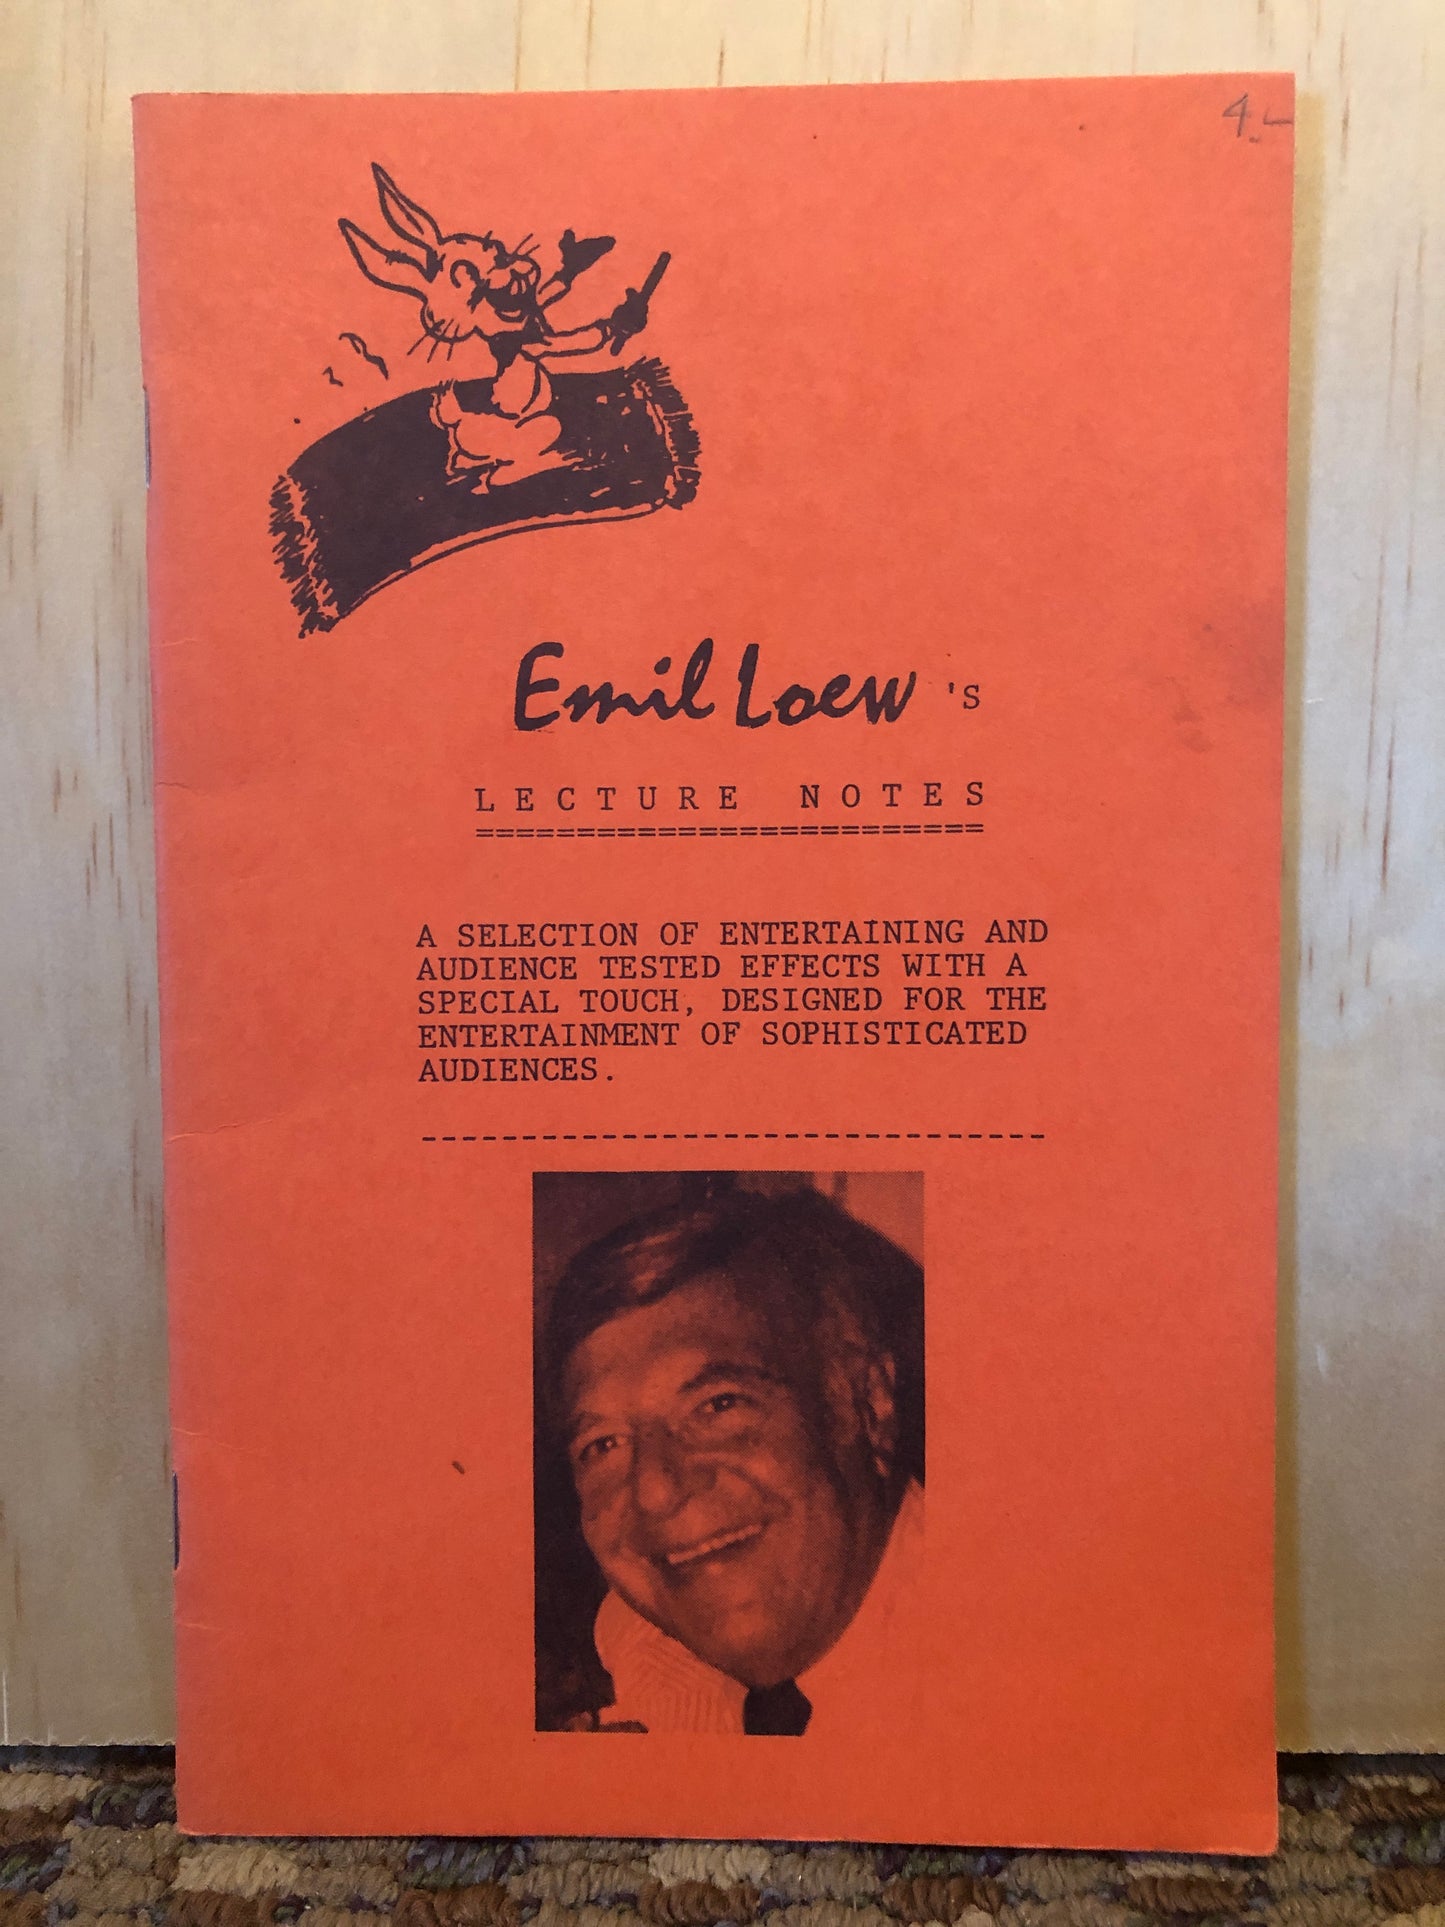 Emil Loew's Lecture Notes